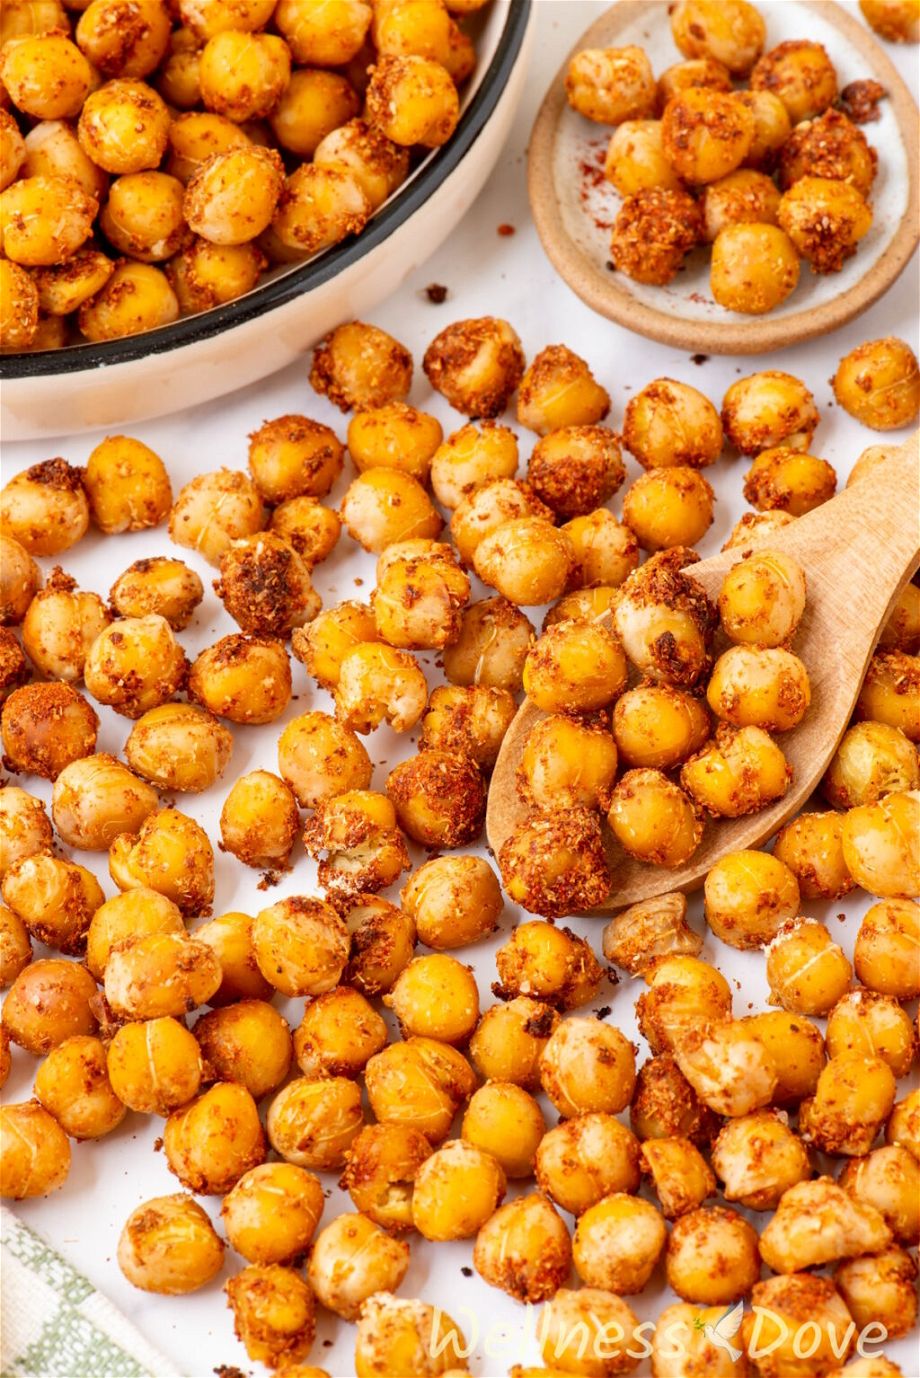 the Oil-free Oven Roasted Chickpeas spread on a table